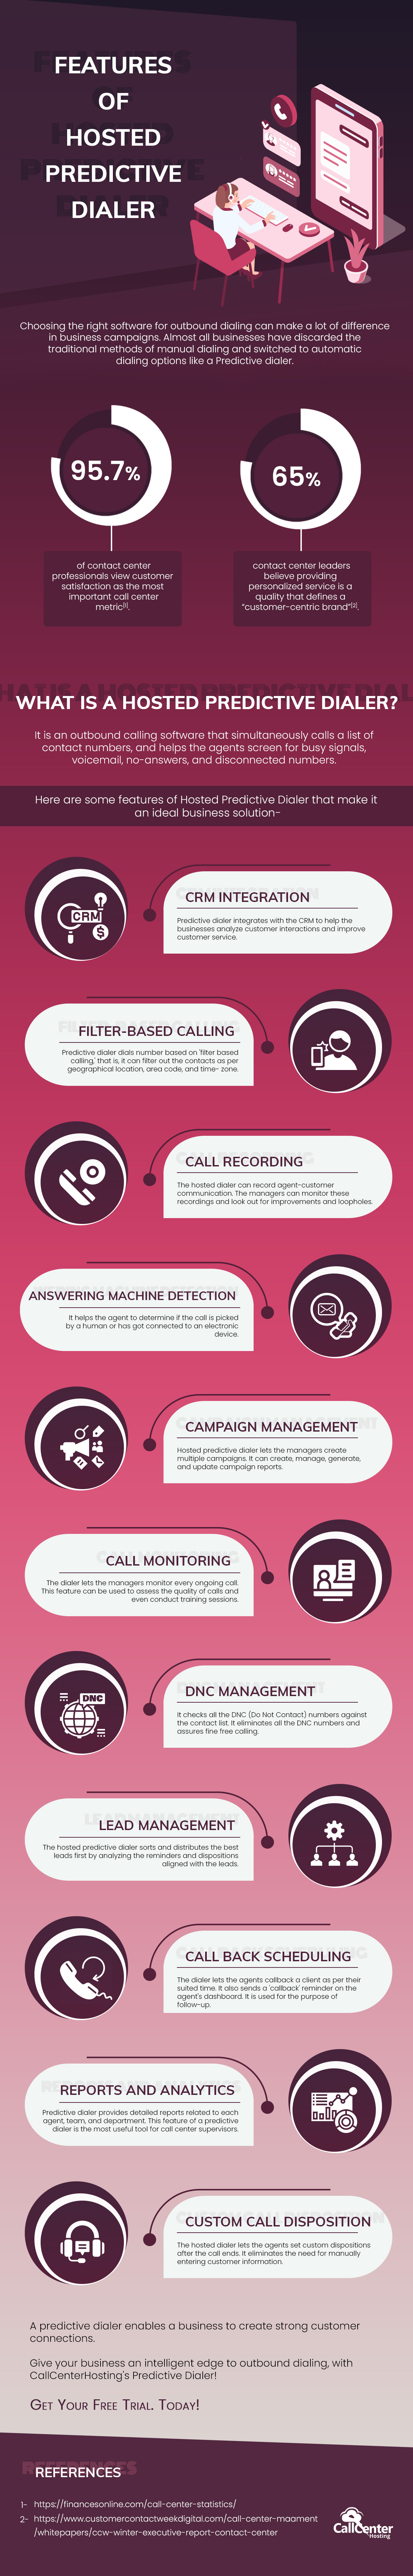 Infographic - Features of Predictive Dialer 